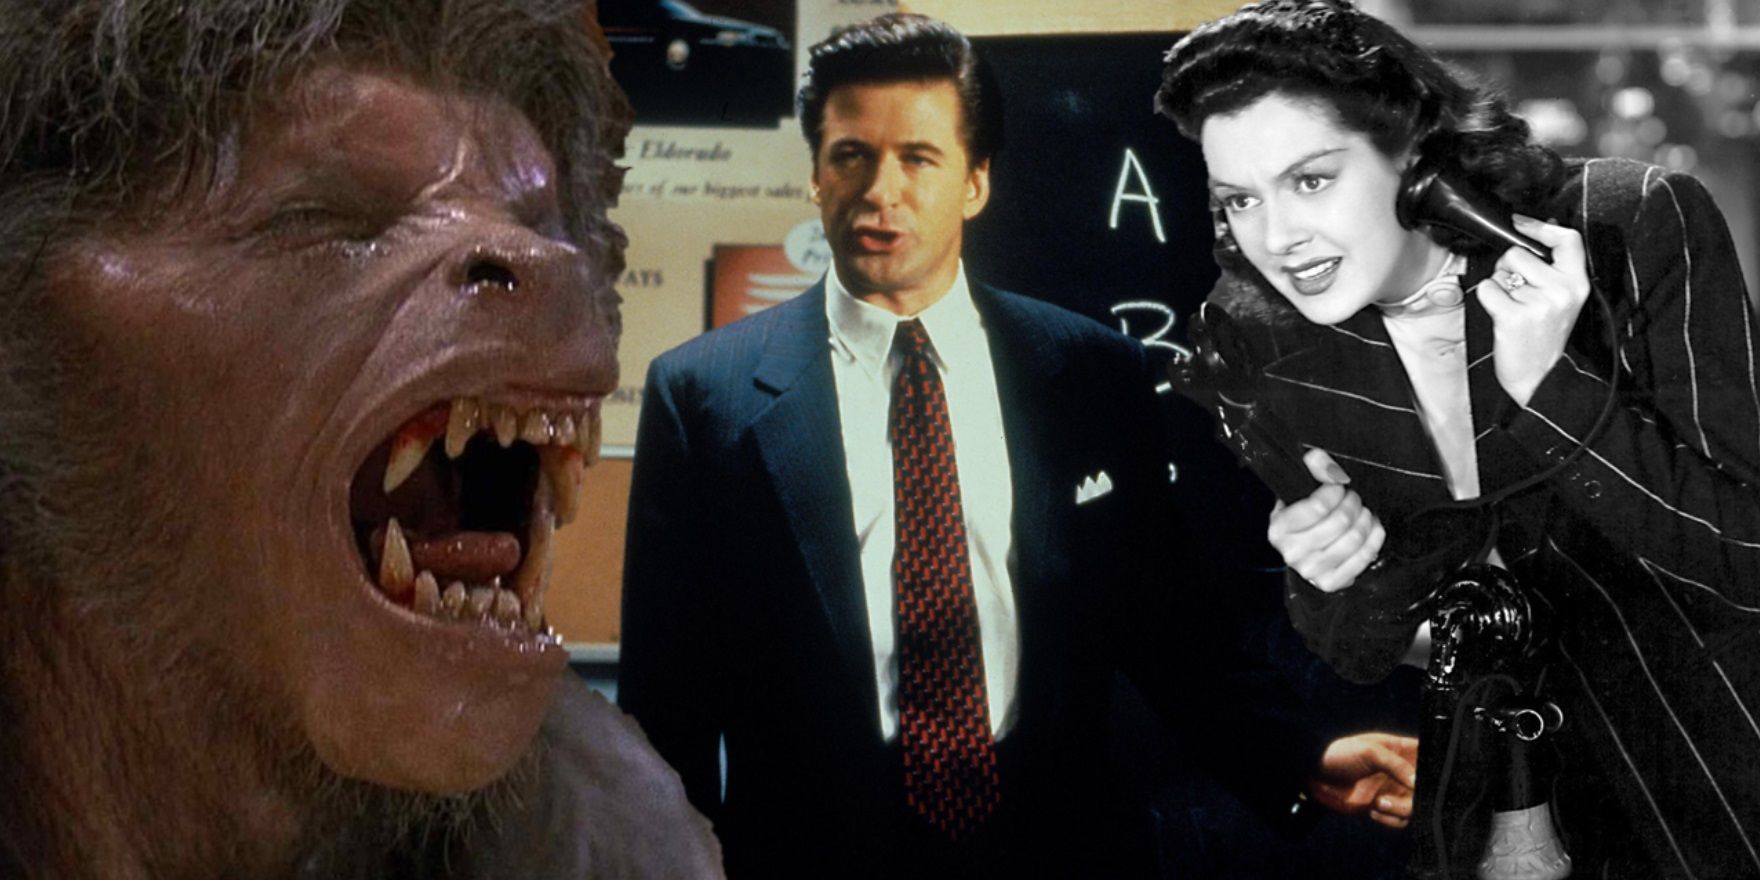 Collage of the werewolf in An American Werewolf in London, Alec Baldwin in Glengarry Glen Ross, and Rosalind Russell in His Girl Friday